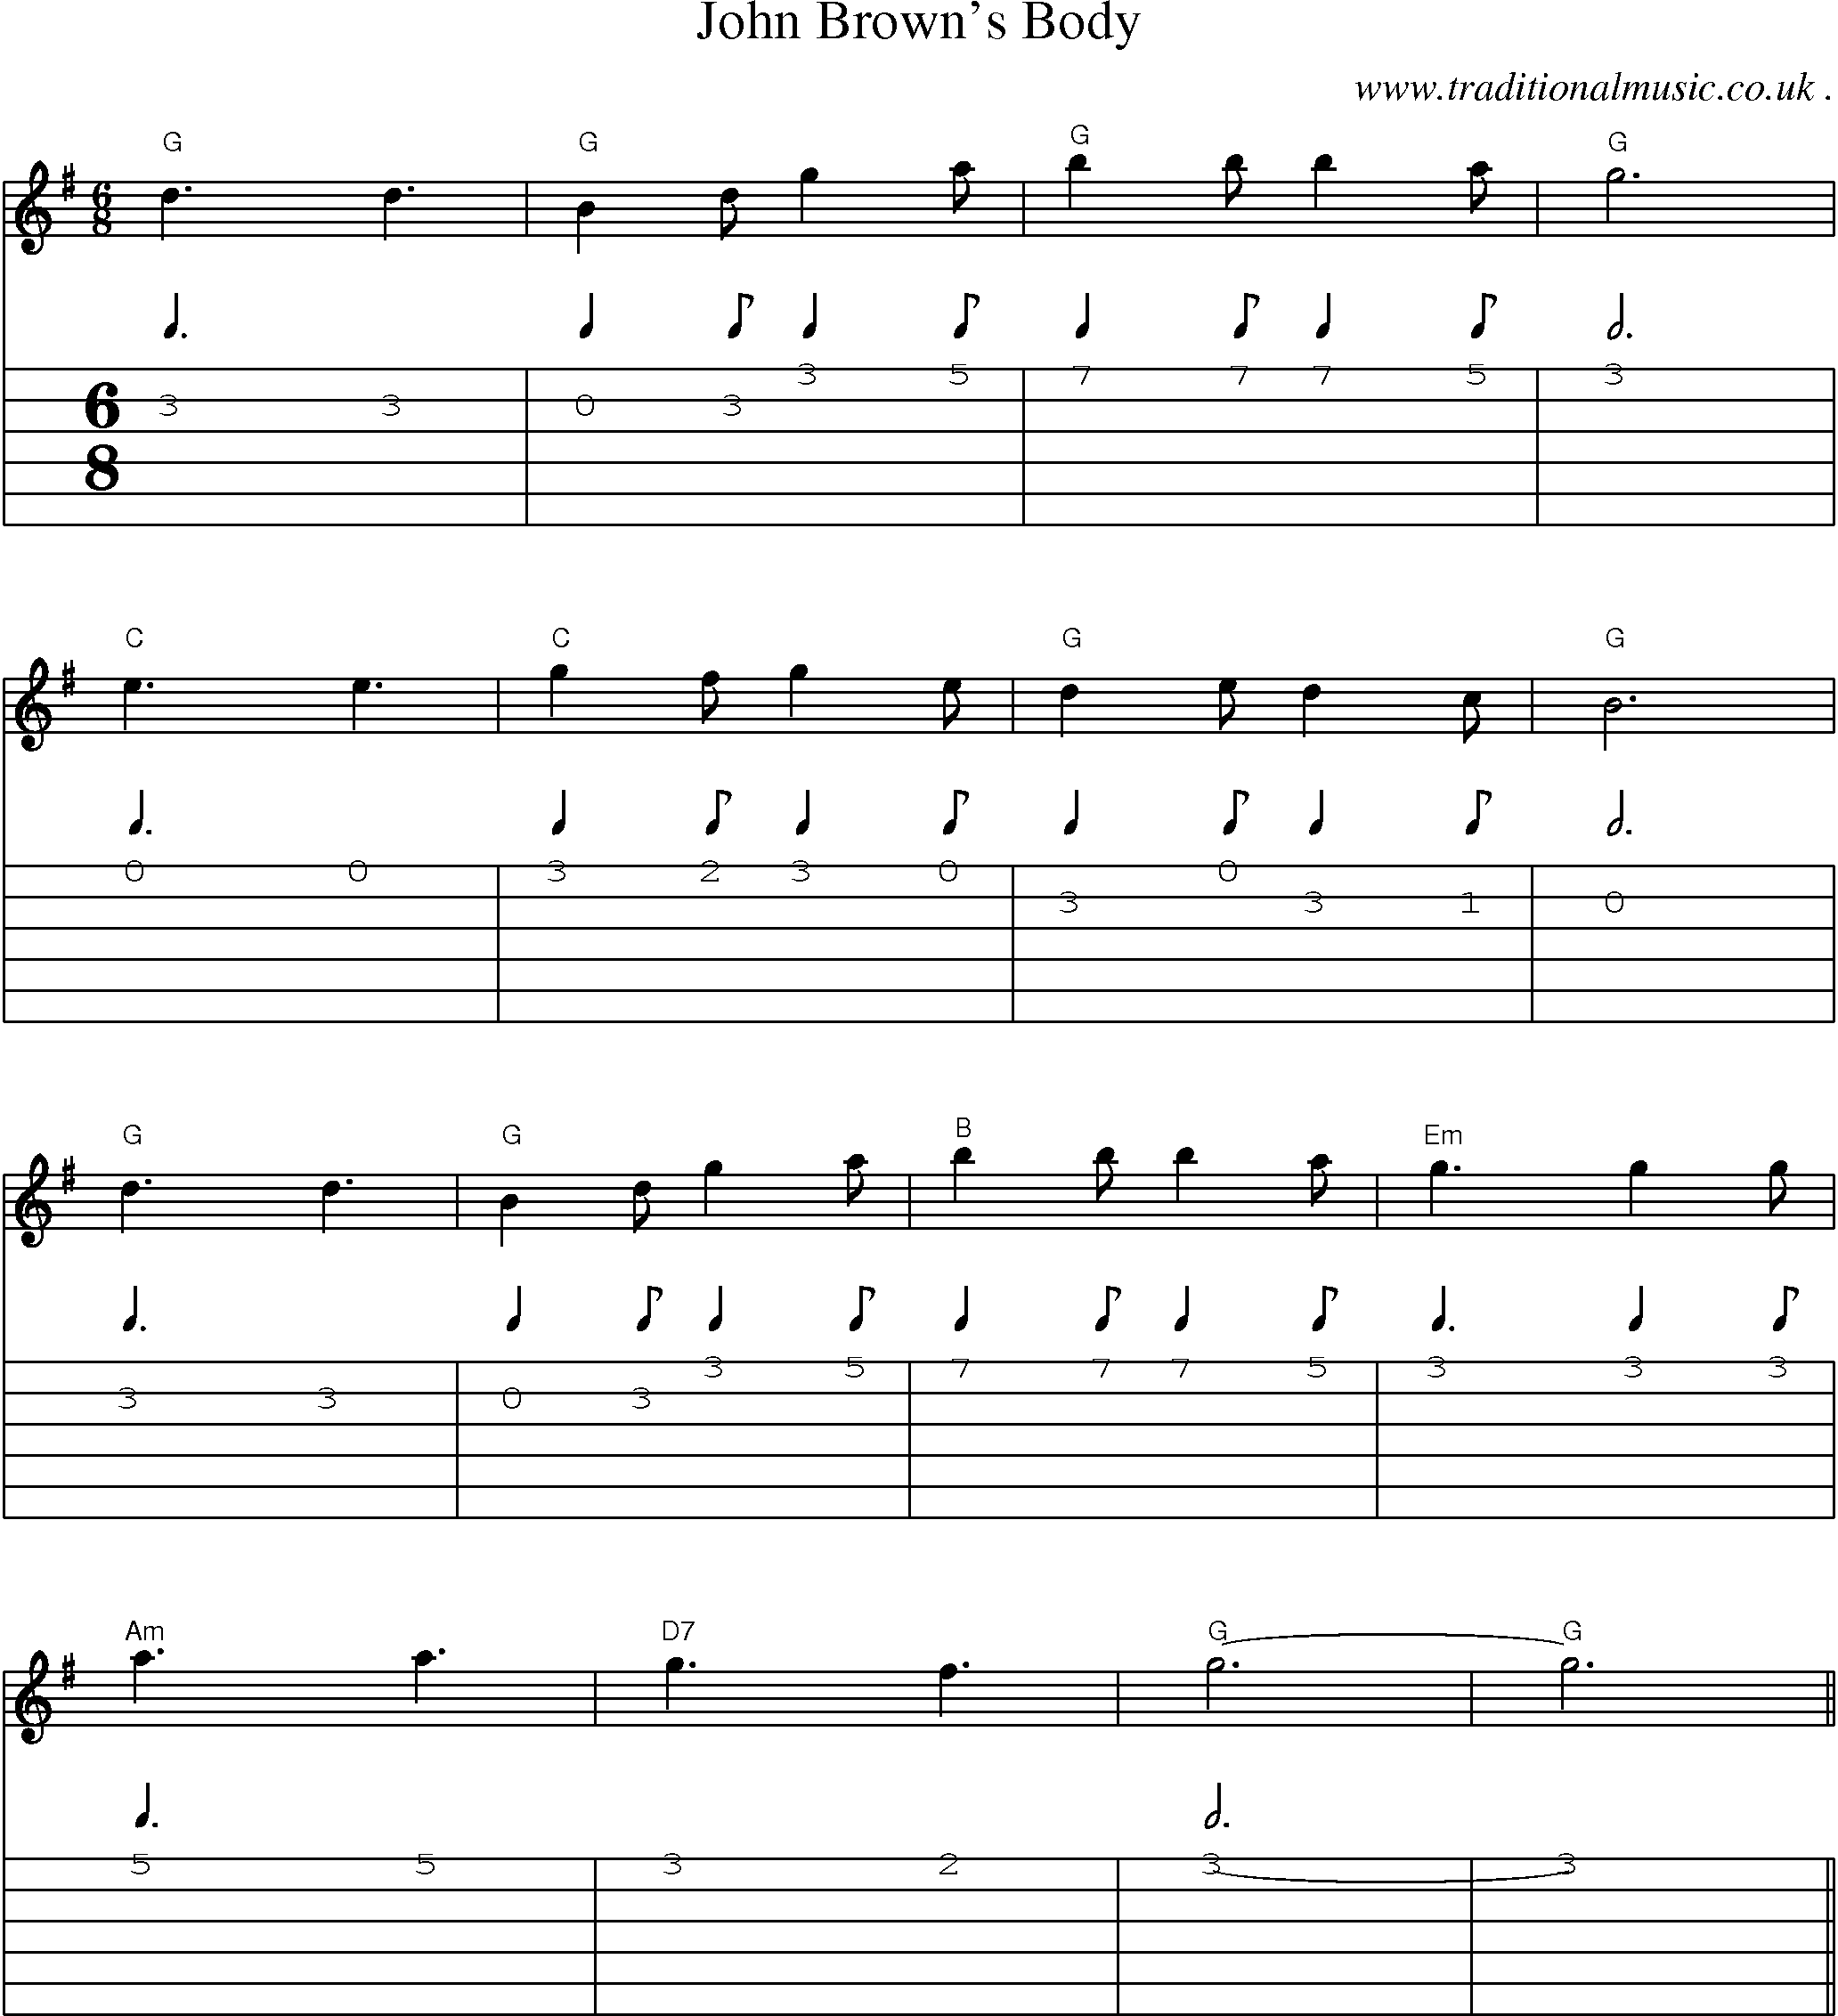 Sheet-Music and Guitar Tabs for John Browns Body